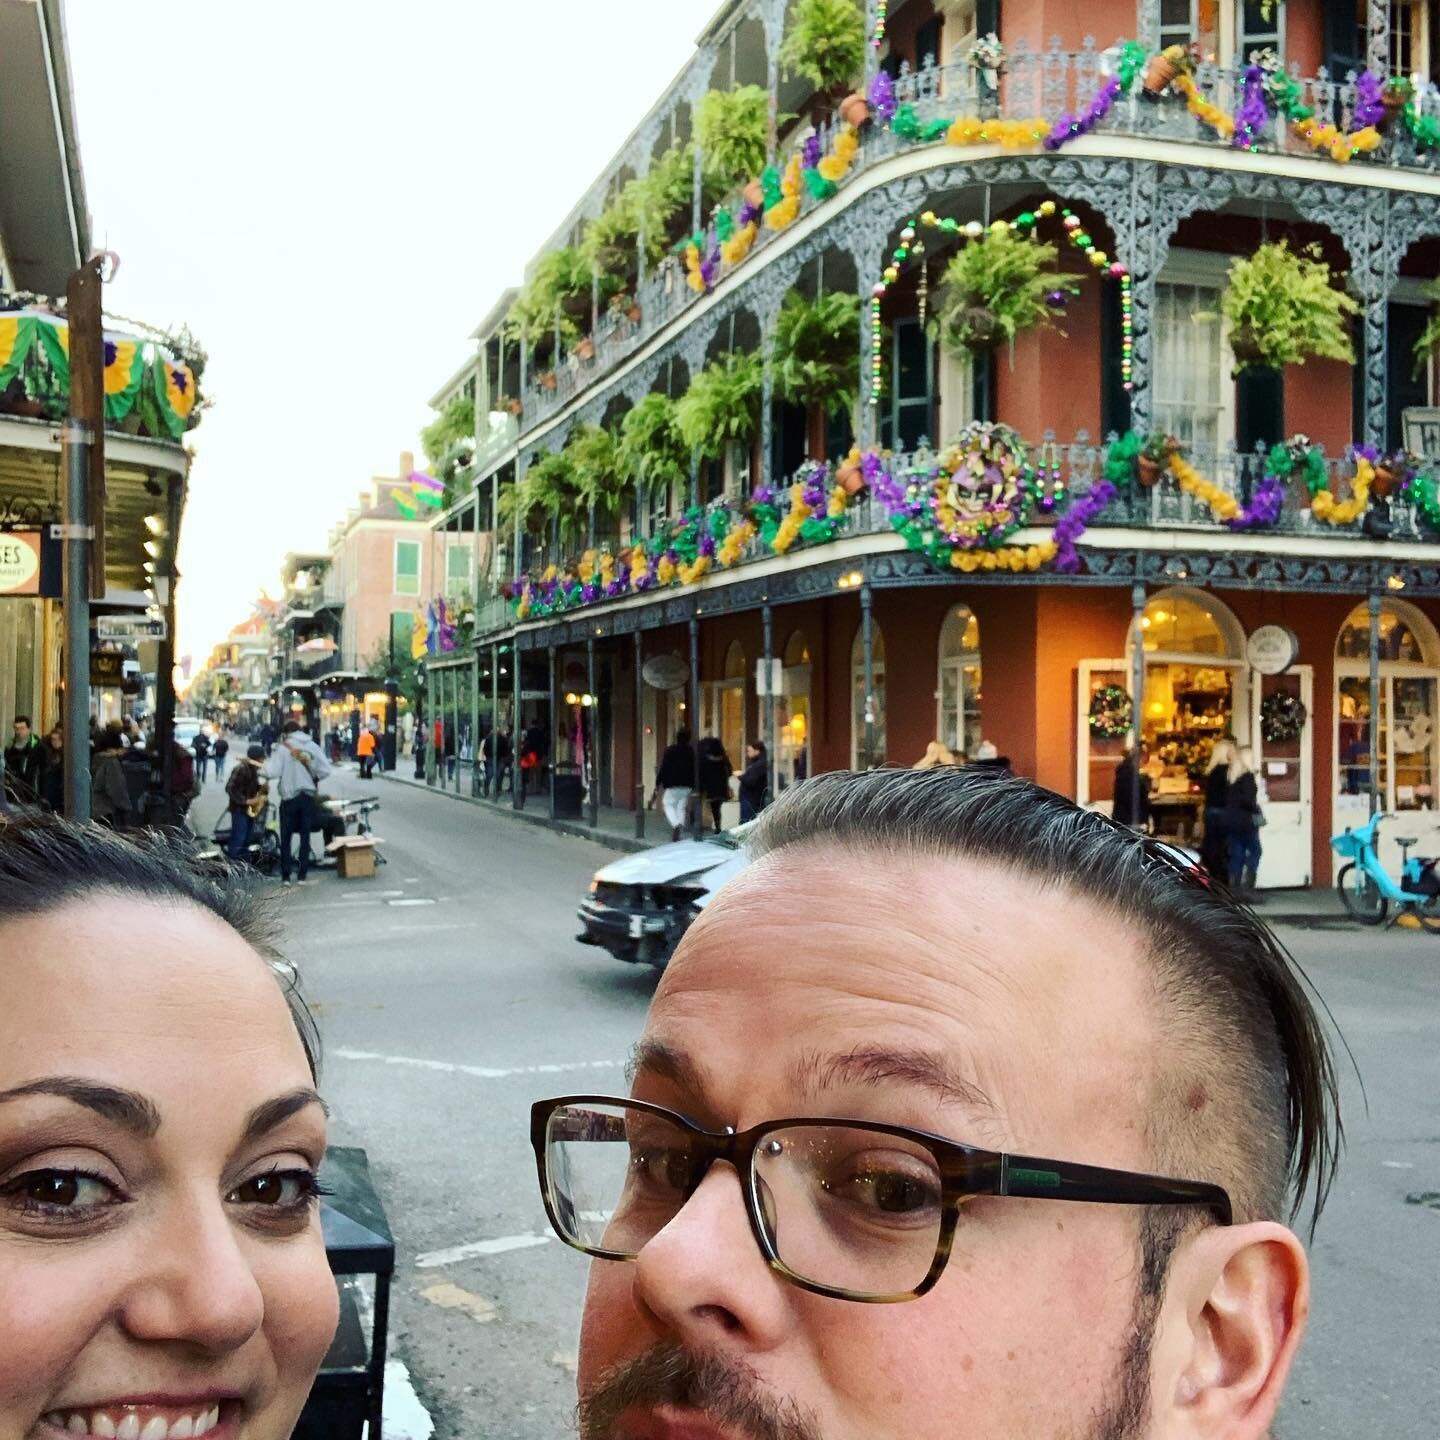 There was too much fun to capture it all in NOLA #fai2020 #folk #nola